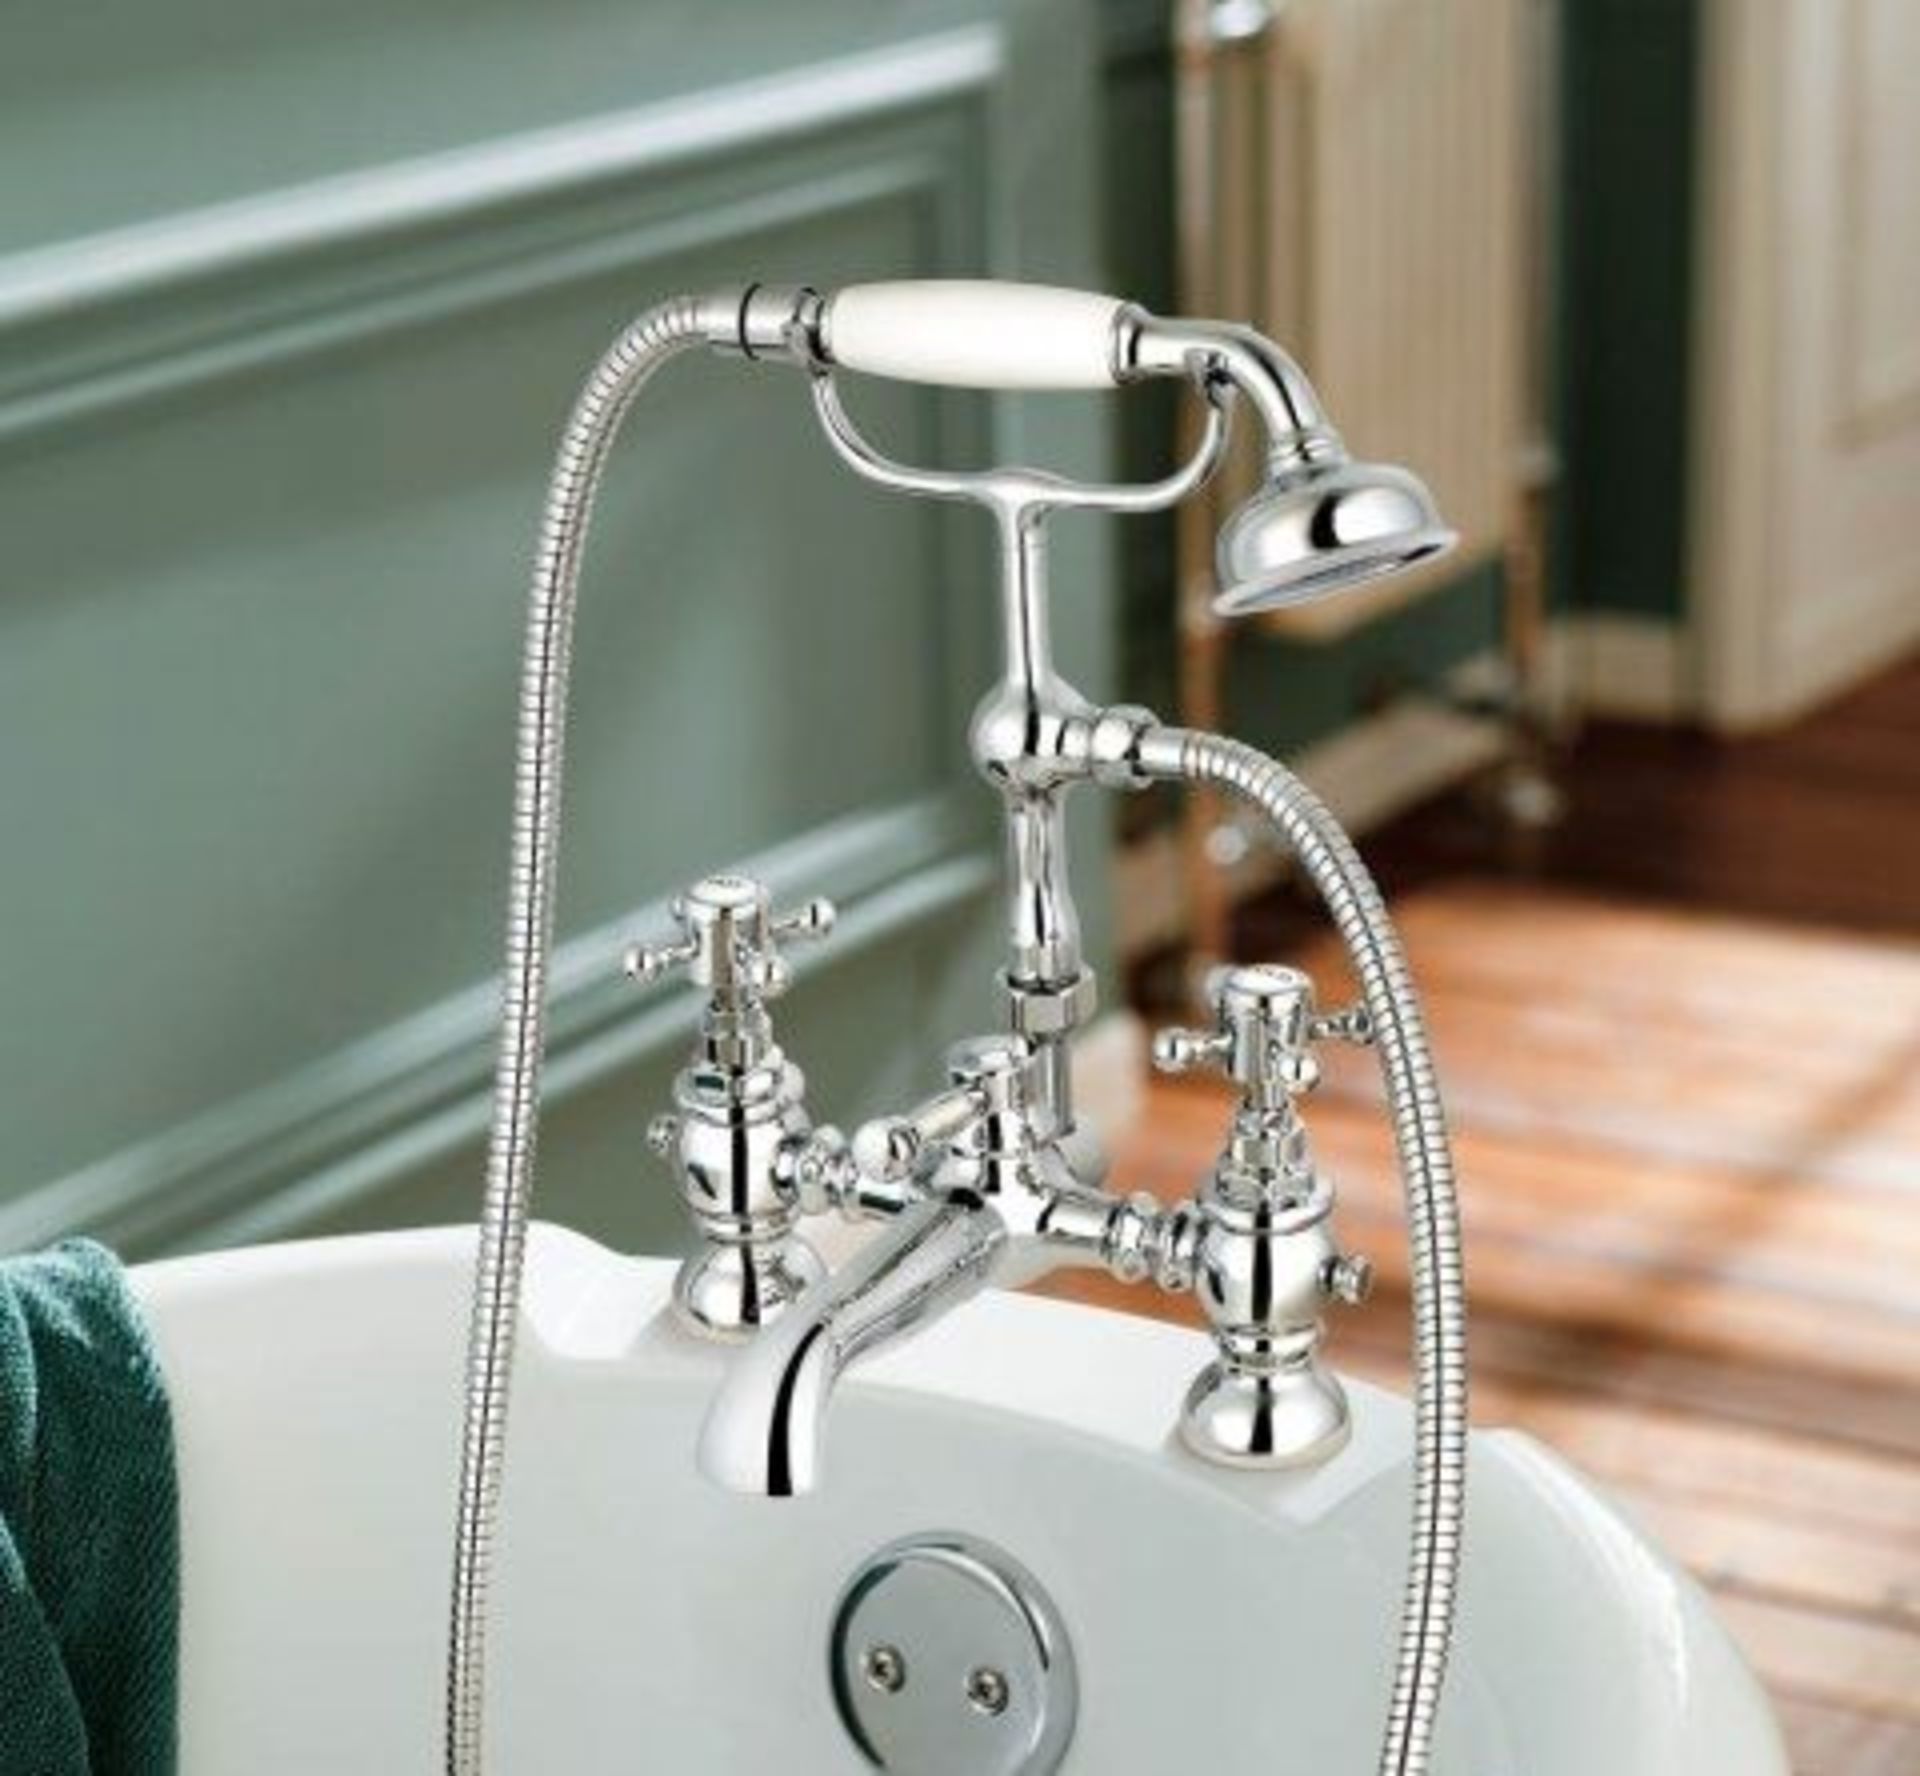 New & Boxed Victoria II Bath Shower Mixer - Traditional Tap With Hand Held.Tb35.Chrome Plated